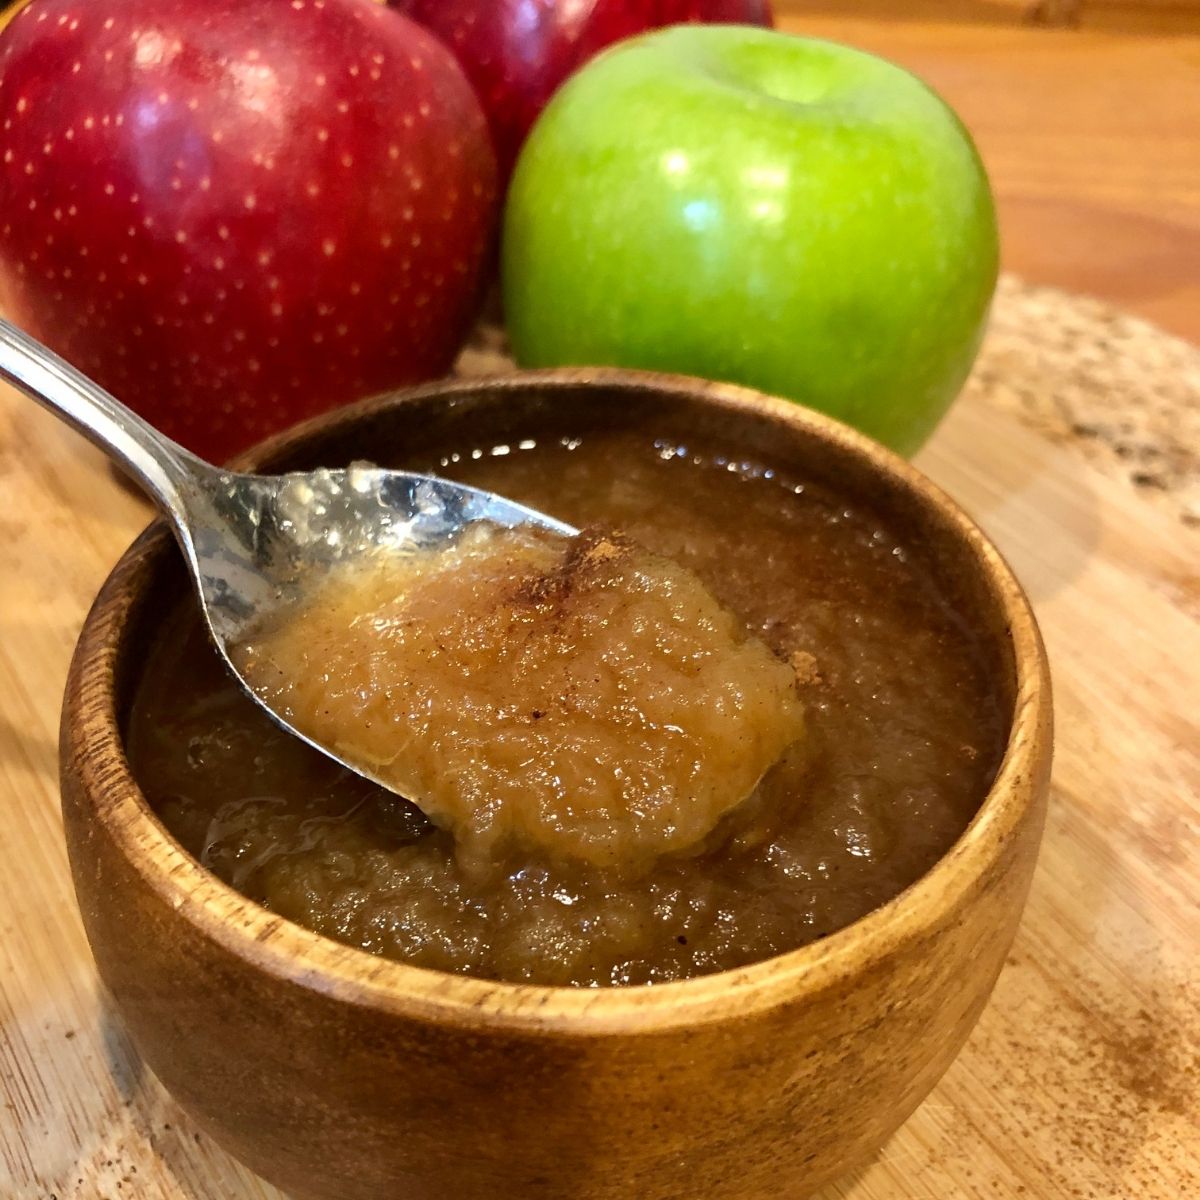 Unsweetened applesauce in a wooden bowl with a spoonful of applesauce with a red and green apple on the side